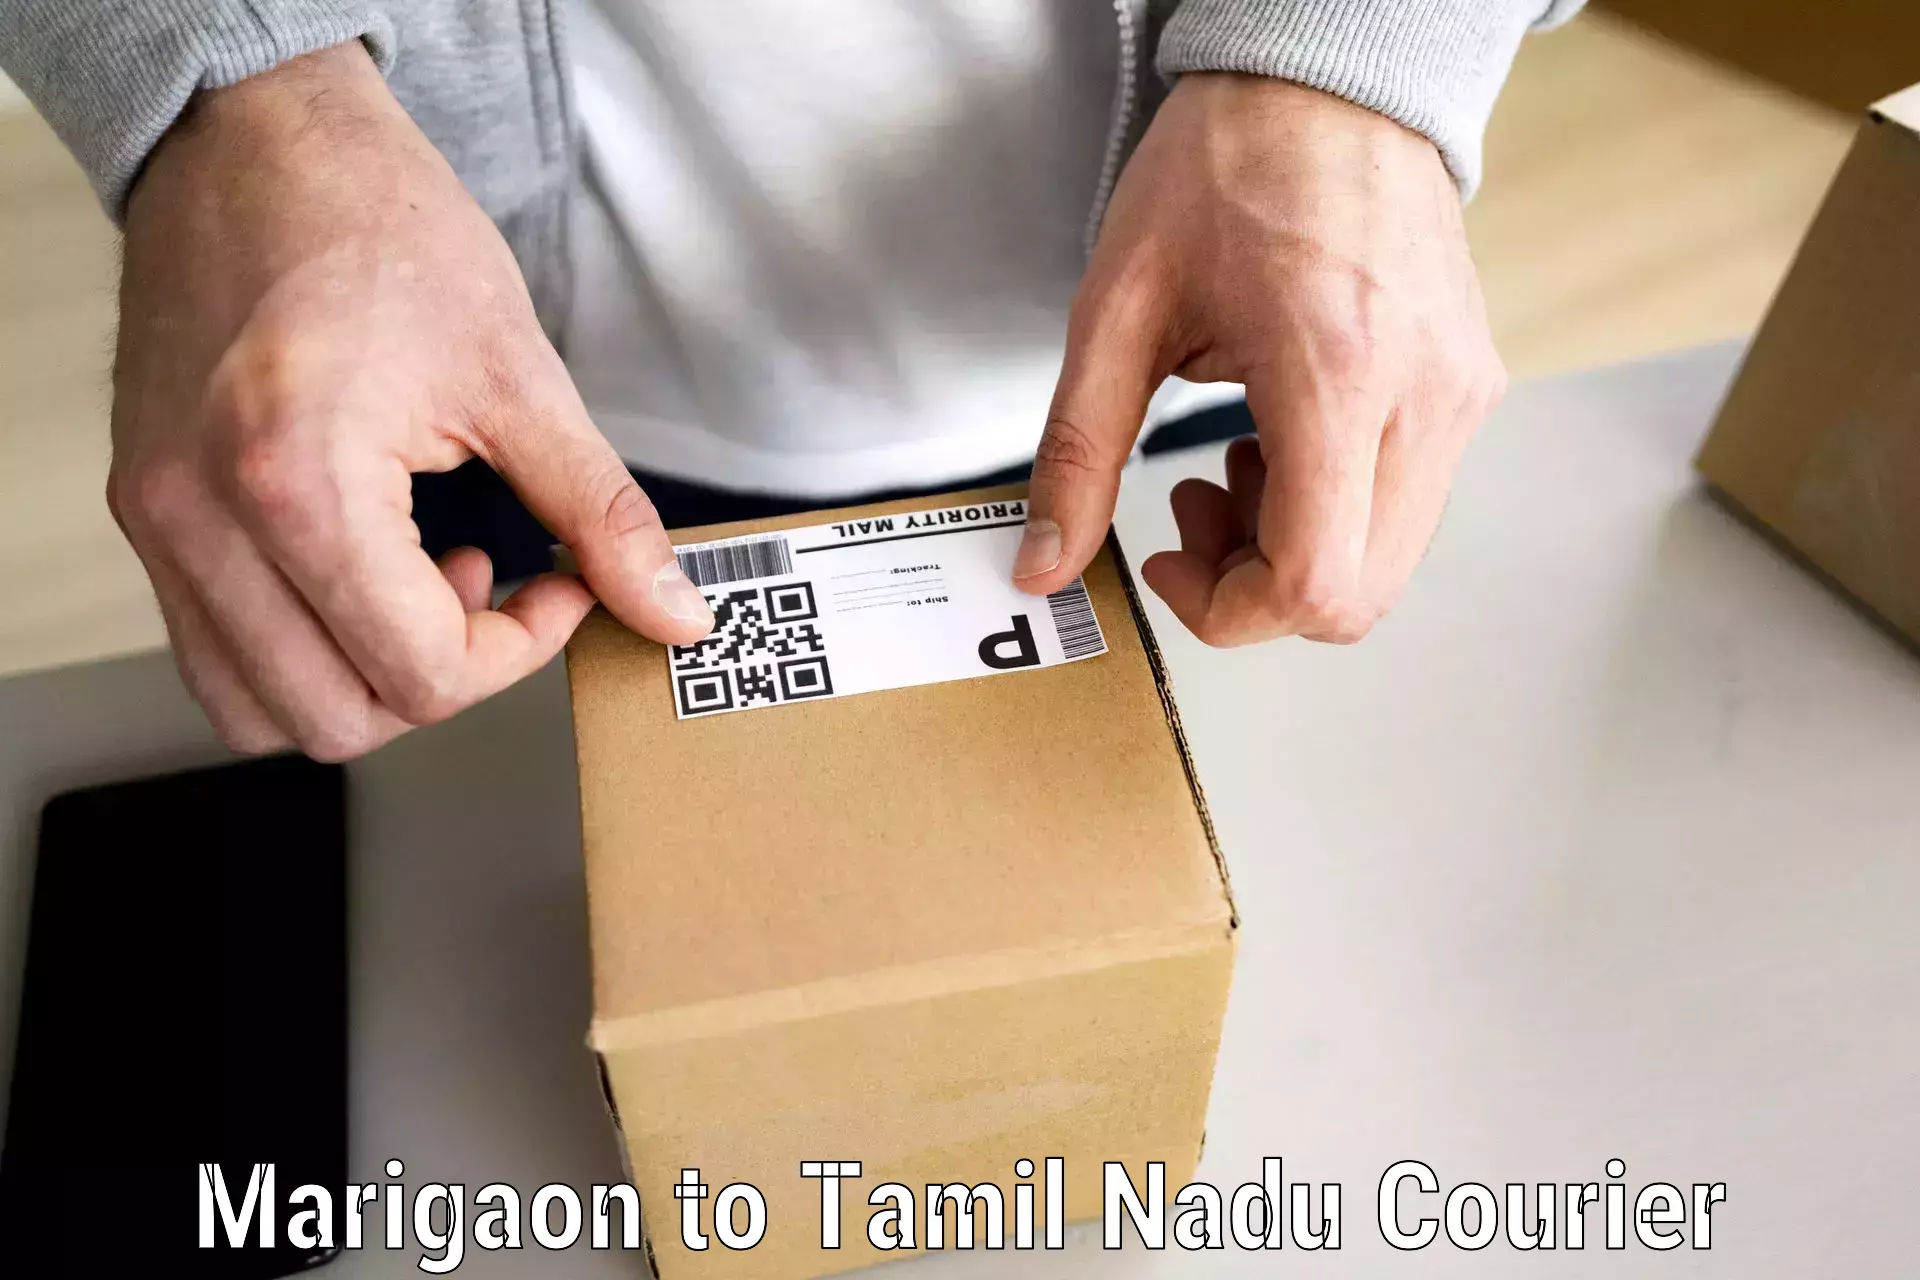 Quality relocation services in Marigaon to Tirunelveli